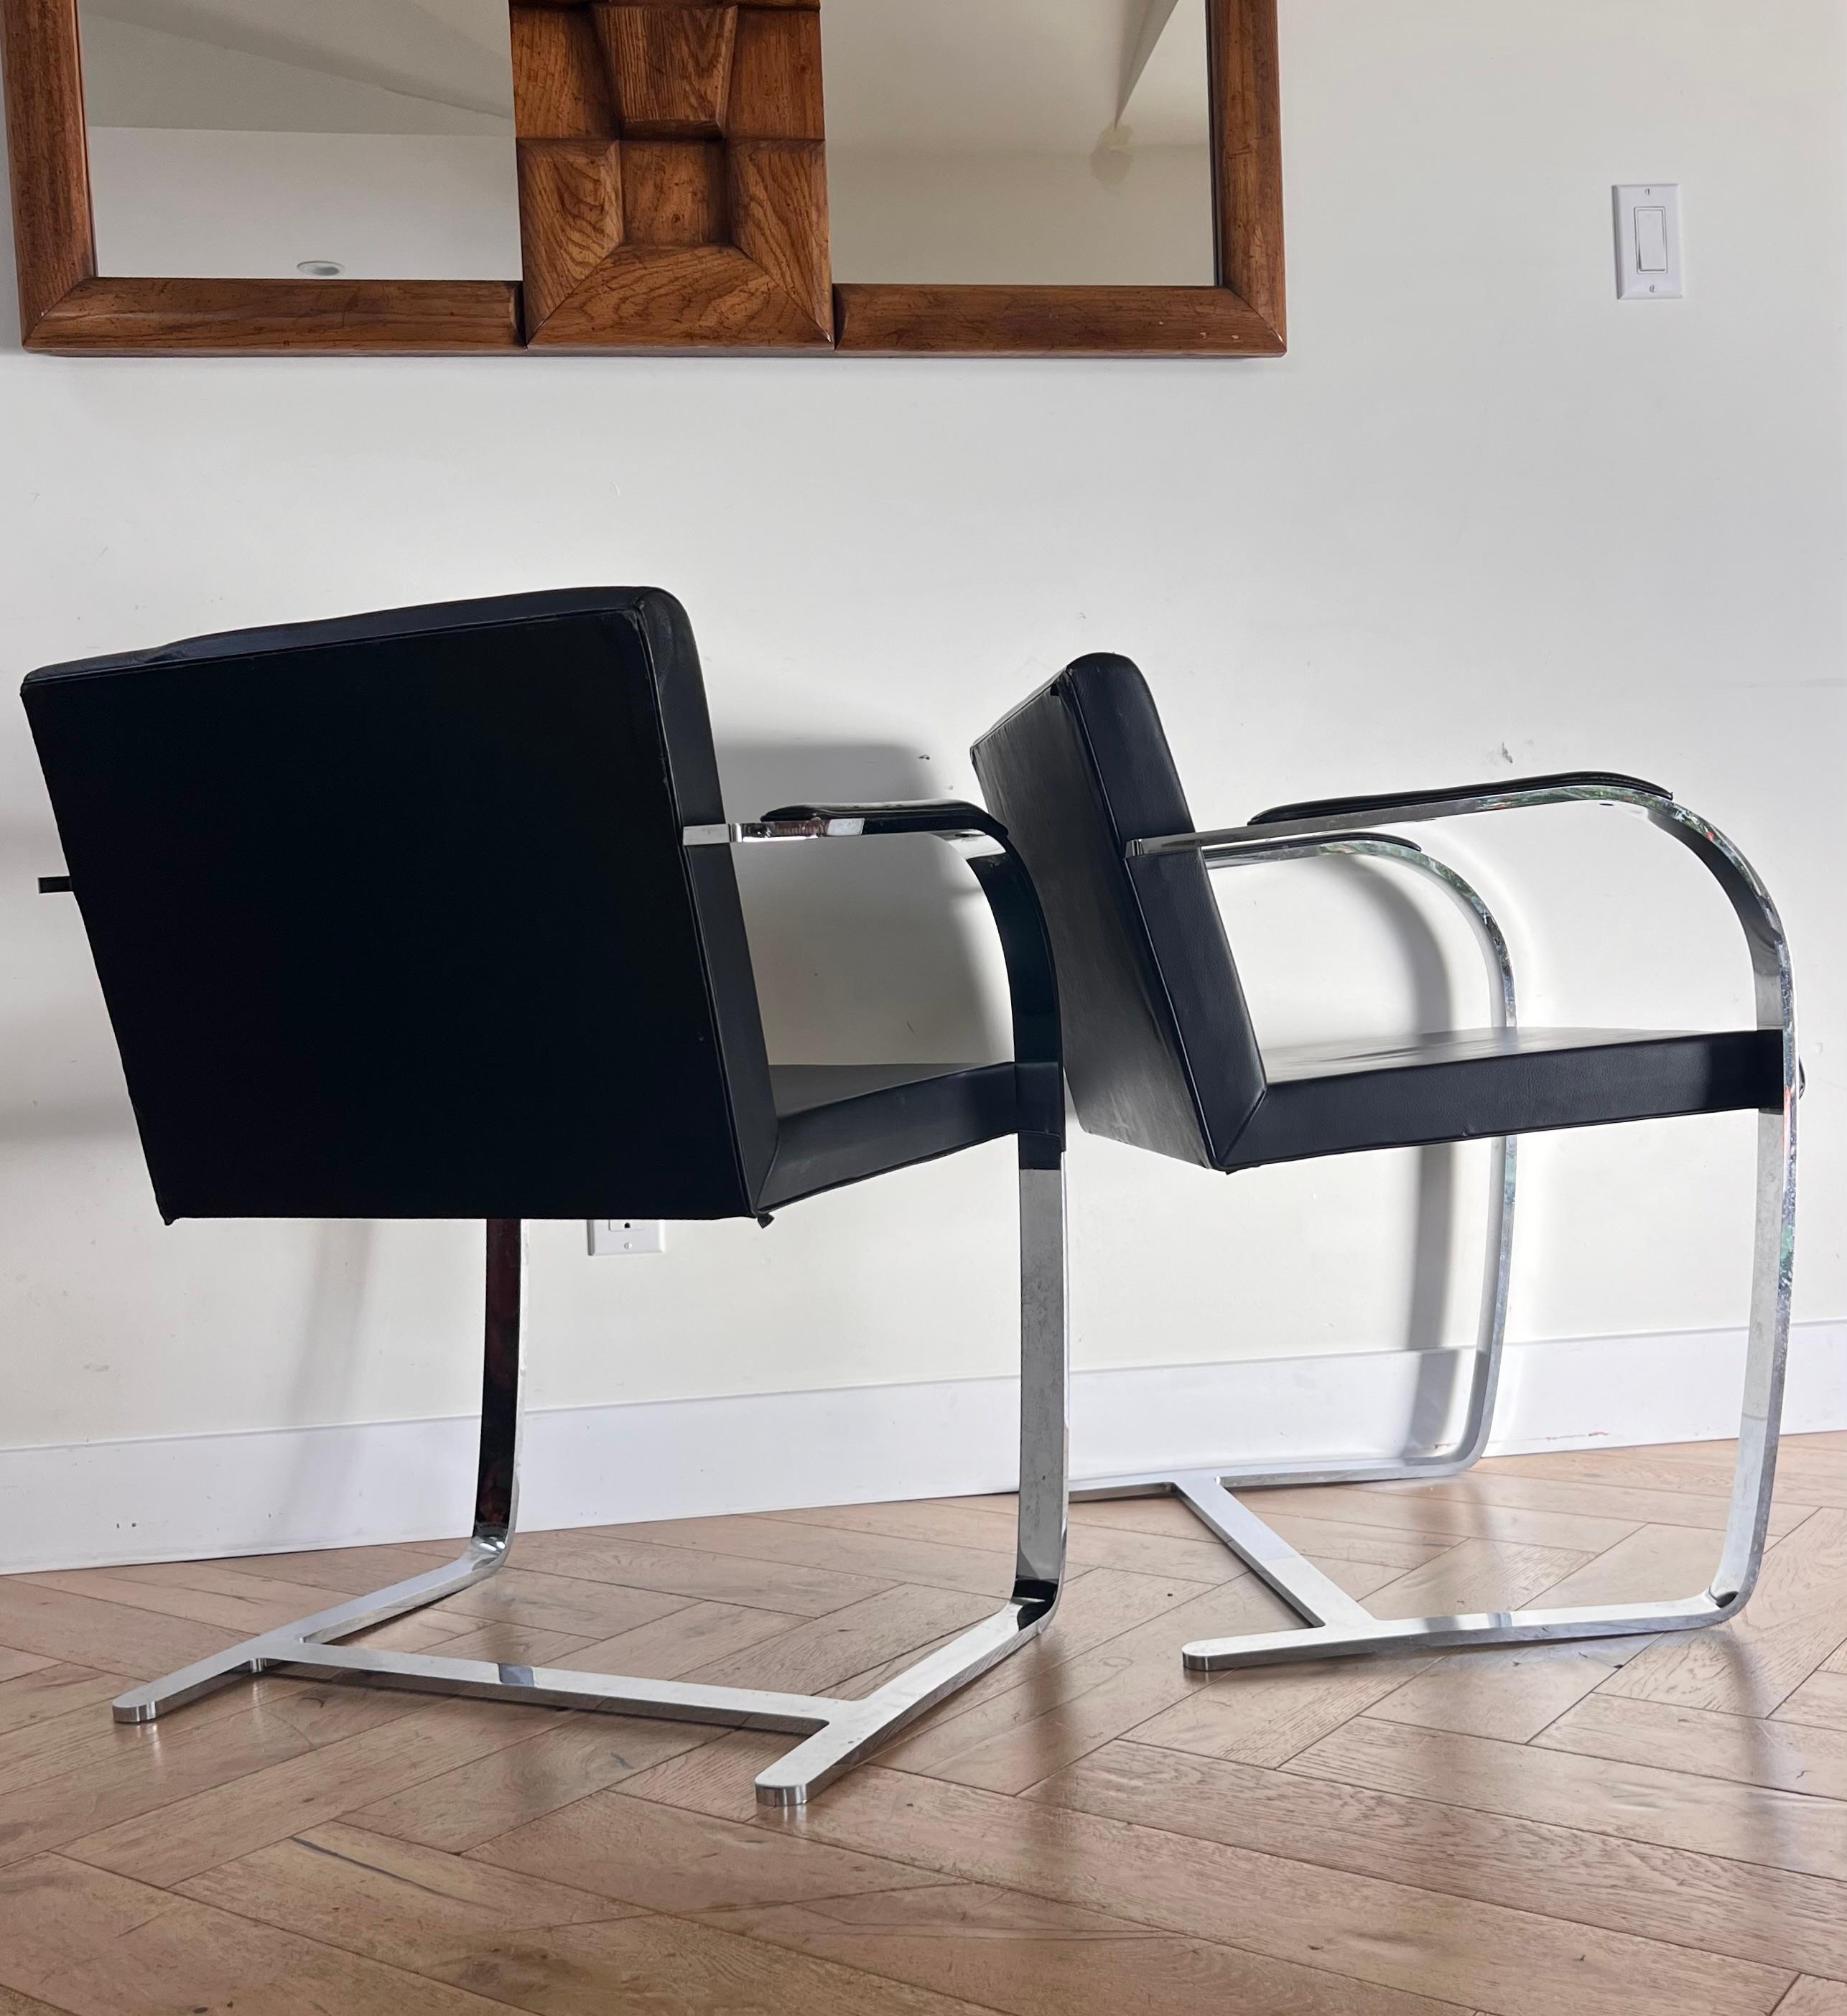 Chrome Pair of Mies van der Rohe Brno chairs by Palazzetti, 1970s For Sale